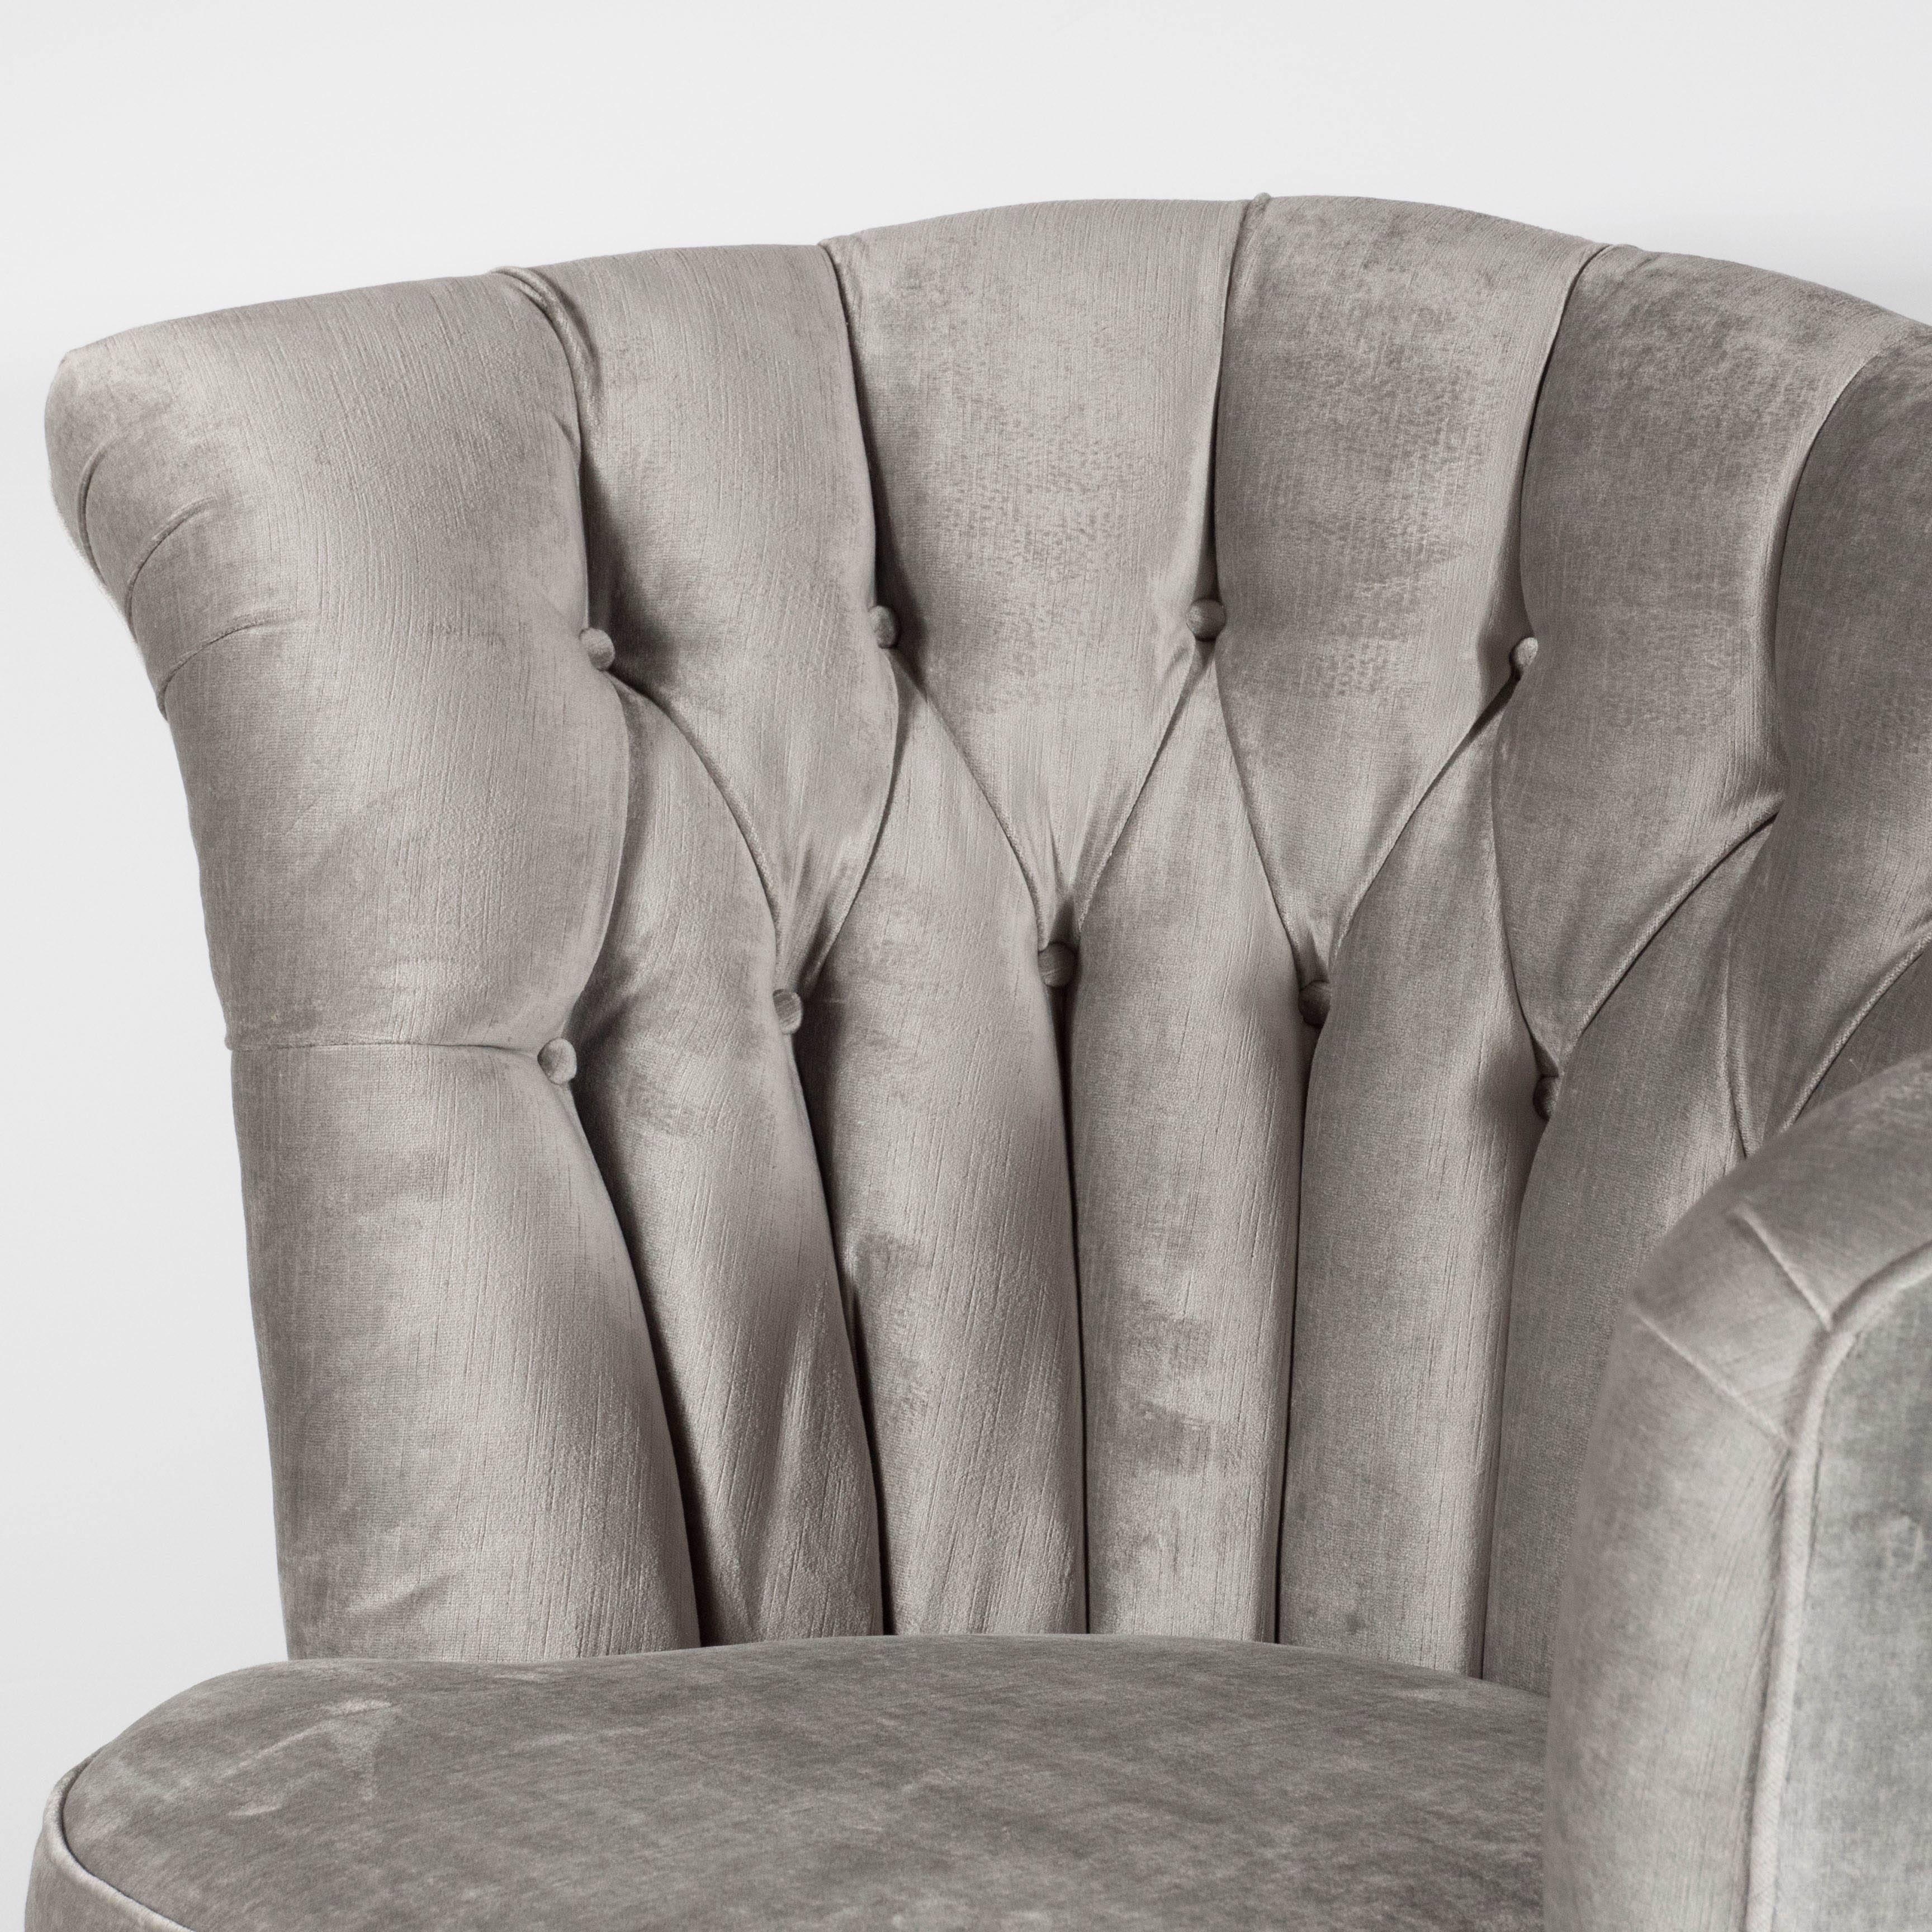 American Pair of Hollywood, 1940s Button-Tufted Asymmetrical Chairs in Platinum Velvet